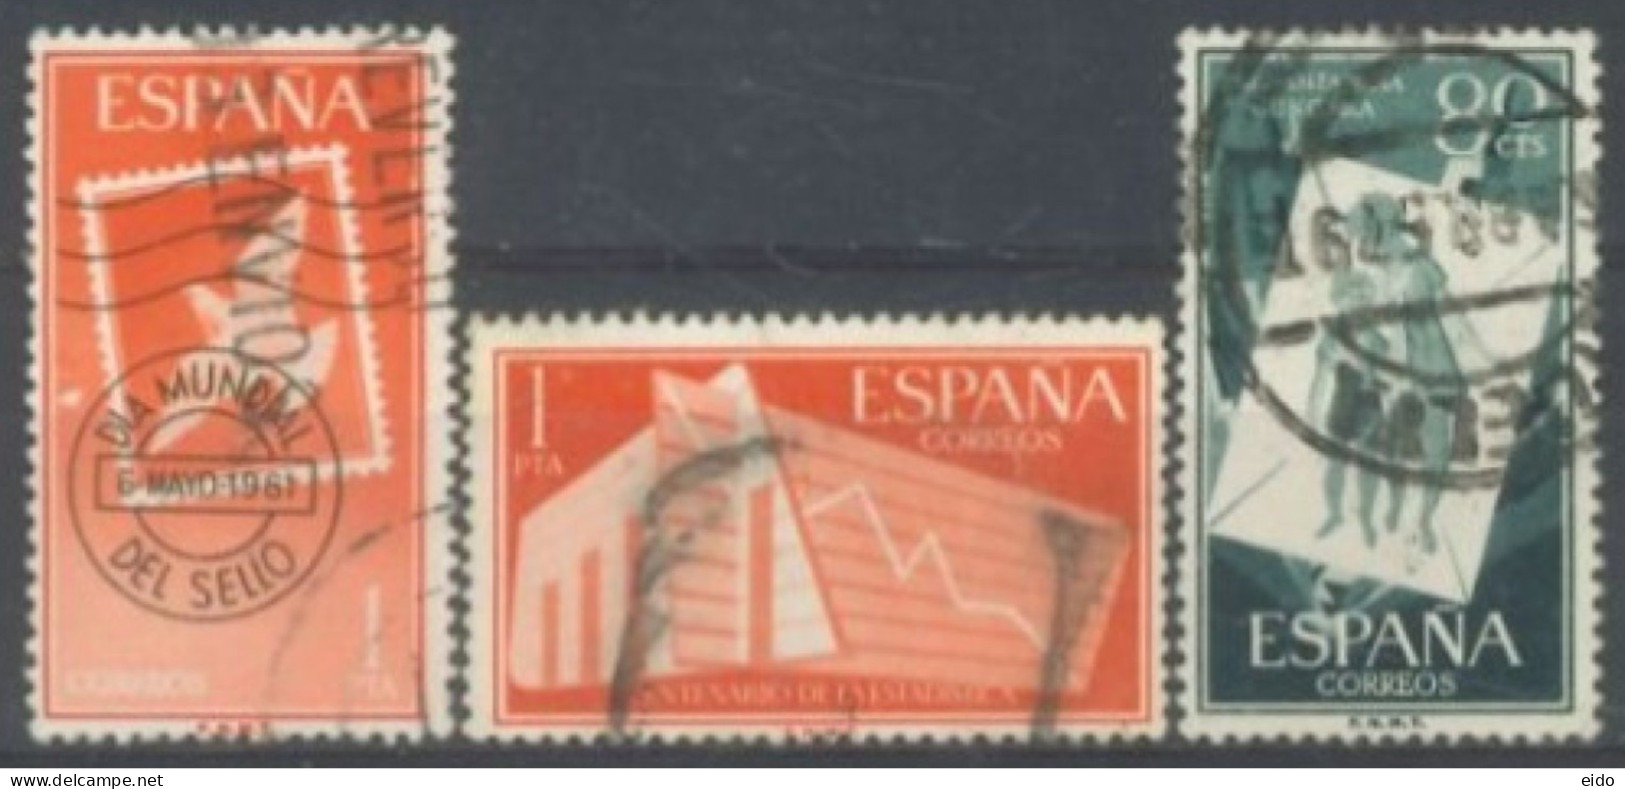 SPAIN, 1956/61, HUNGARIAN CHILDREN, CANCELED STAMP & STATISTICAL SET OF 3, # 855,860, & 988, USED. - Used Stamps